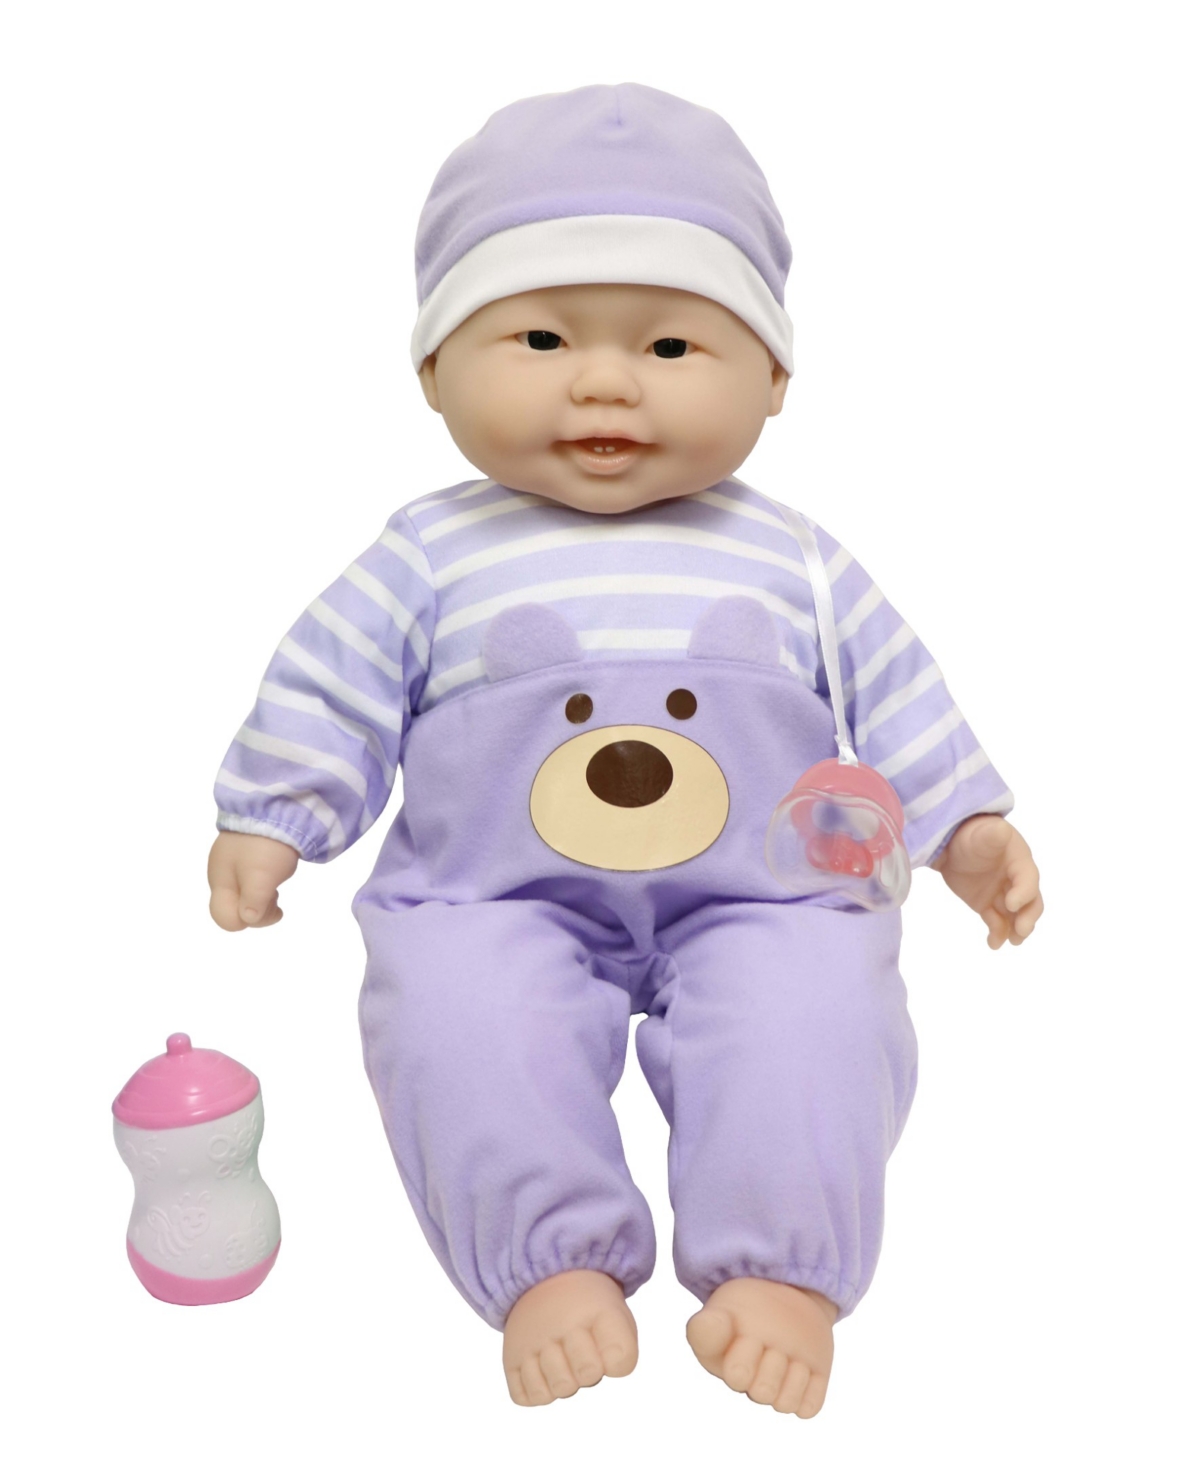 Jc Toys Lots To Cuddle Babies 20" Asian Baby Doll Purple Outfit In Pink - Asian